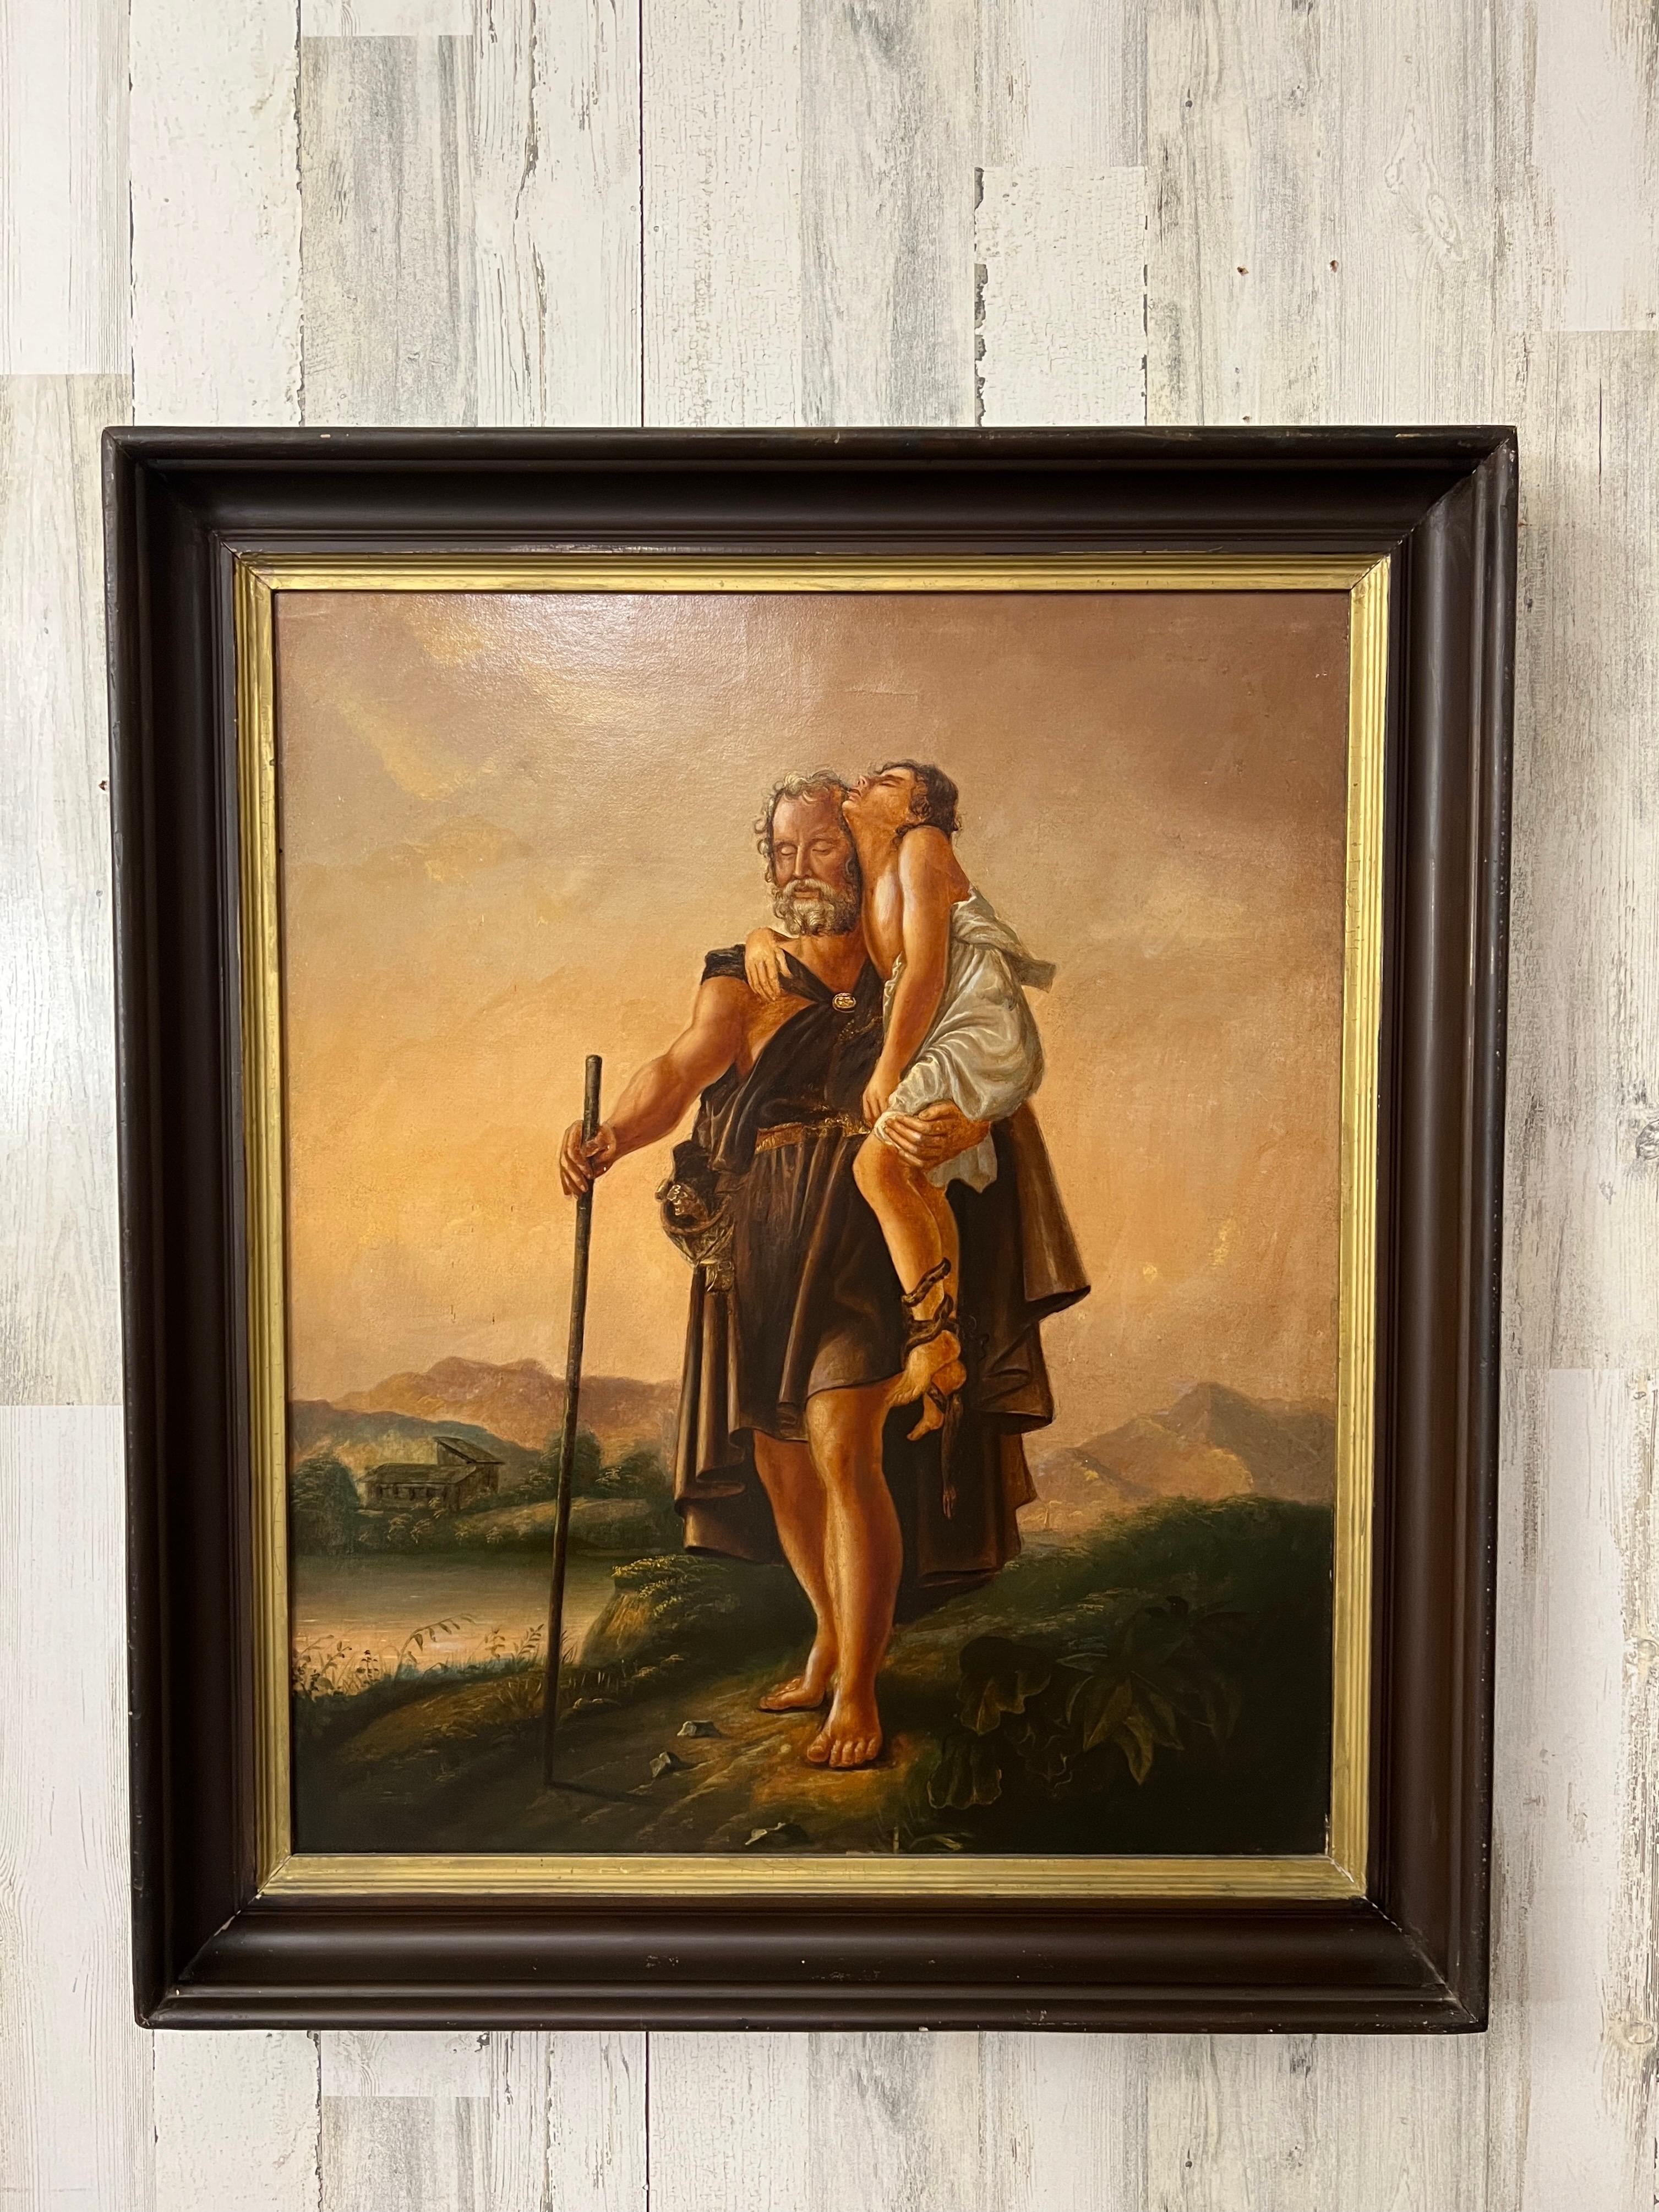 Antique 19th century painting of Abraham carrying Issac from mount Moriah
Oil on canvas please see pictures. In the style of George Caleb Bingham.